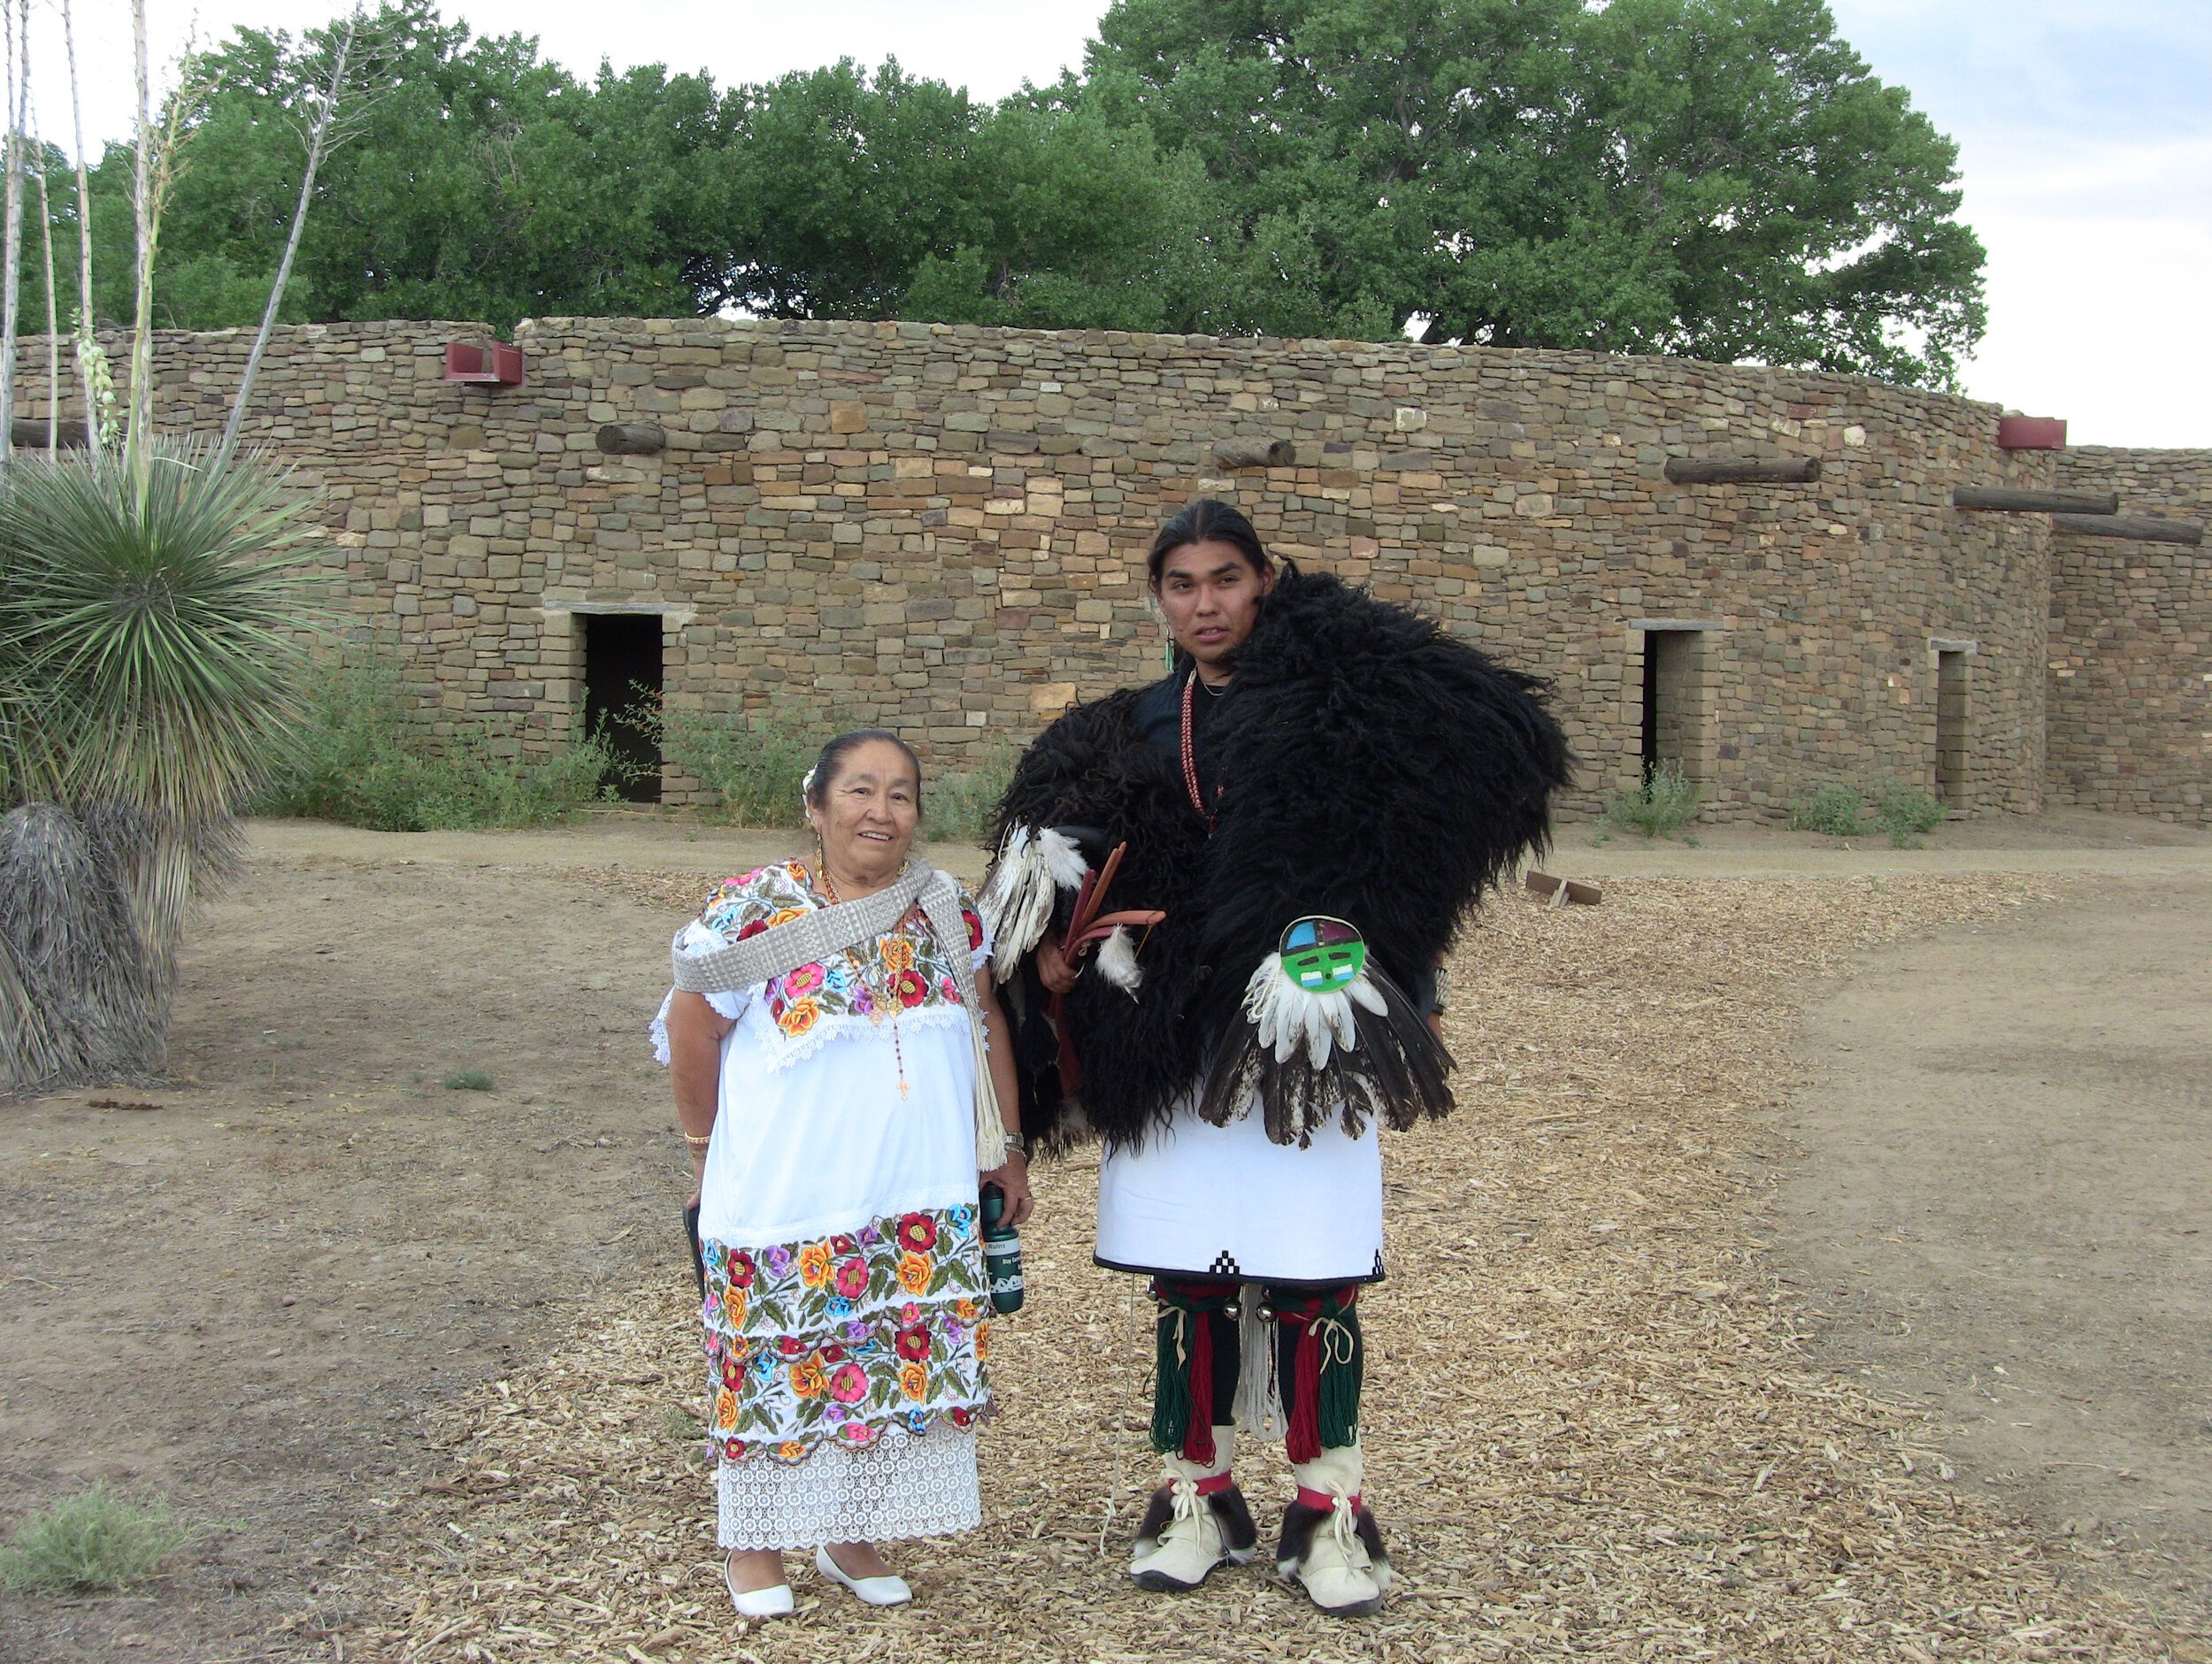  - Yucatec Maya grandmother and Laguna Pueblo youth at one of the ancestral sites of the Pueblo people of New Mexico, USA. The multimedia workshop took participants to learn from sacred sites of great cultural importance. (Photo Credit: Nicola Wagenberg, The Cultural Conservancy)